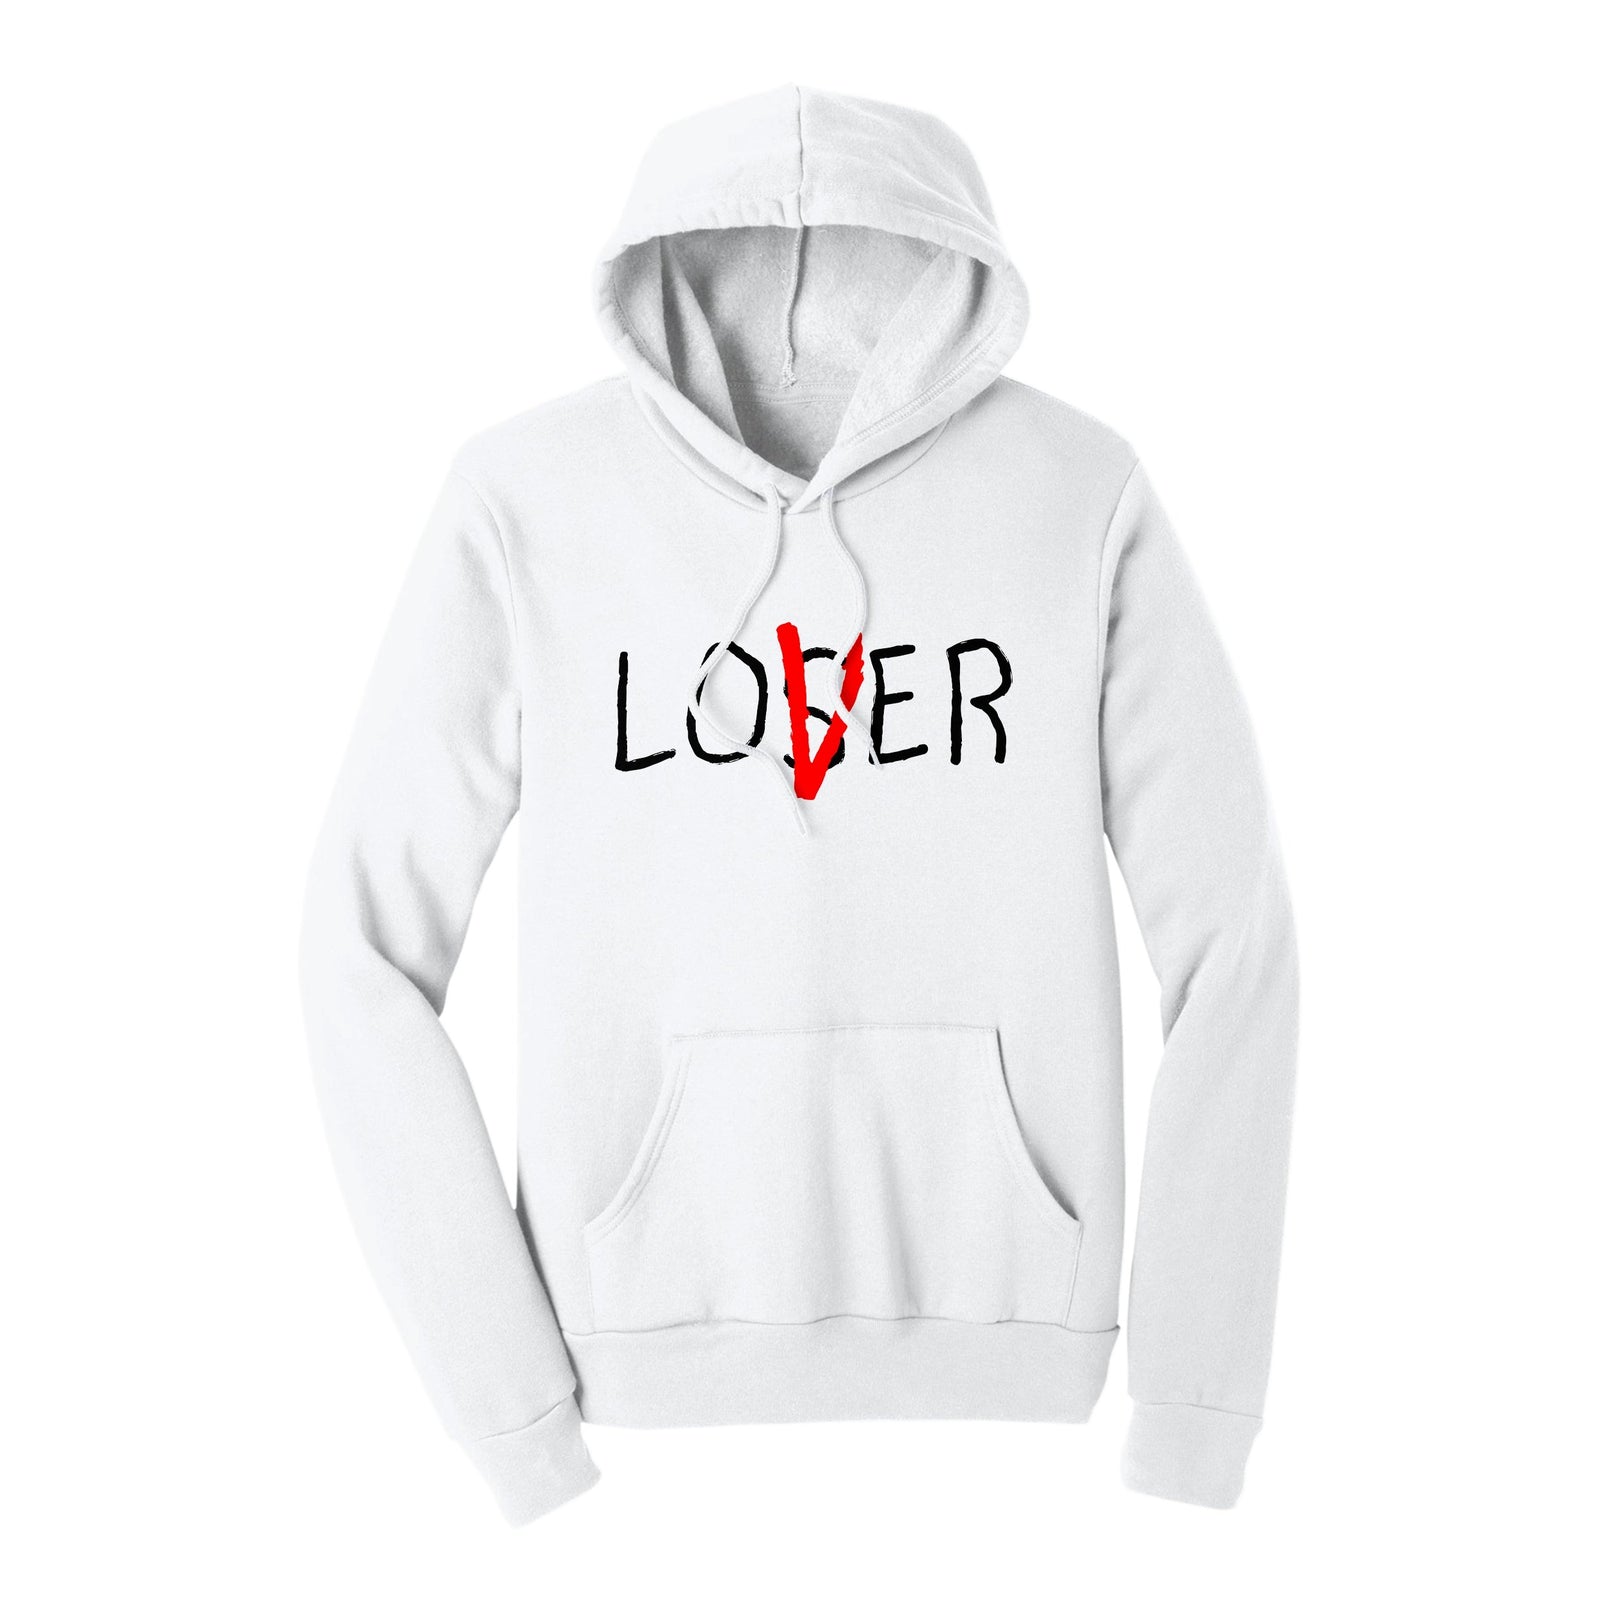 //cdn.shopify.com/s/files/1/0274/2488/2766/products/loser-lover-hoodie-388188_5000x.jpg?v=1675242836 5000w,
    //cdn.shopify.com/s/files/1/0274/2488/2766/products/loser-lover-hoodie-388188_4500x.jpg?v=1675242836 4500w,
    //cdn.shopify.com/s/files/1/0274/2488/2766/products/loser-lover-hoodie-388188_4000x.jpg?v=1675242836 4000w,
    //cdn.shopify.com/s/files/1/0274/2488/2766/products/loser-lover-hoodie-388188_3500x.jpg?v=1675242836 3500w,
    //cdn.shopify.com/s/files/1/0274/2488/2766/products/loser-lover-hoodie-388188_3000x.jpg?v=1675242836 3000w,
    //cdn.shopify.com/s/files/1/0274/2488/2766/products/loser-lover-hoodie-388188_2500x.jpg?v=1675242836 2500w,
    //cdn.shopify.com/s/files/1/0274/2488/2766/products/loser-lover-hoodie-388188_2000x.jpg?v=1675242836 2000w,
    //cdn.shopify.com/s/files/1/0274/2488/2766/products/loser-lover-hoodie-388188_1800x.jpg?v=1675242836 1800w,
    //cdn.shopify.com/s/files/1/0274/2488/2766/products/loser-lover-hoodie-388188_1600x.jpg?v=1675242836 1600w,
    //cdn.shopify.com/s/files/1/0274/2488/2766/products/loser-lover-hoodie-388188_1400x.jpg?v=1675242836 1400w,
    //cdn.shopify.com/s/files/1/0274/2488/2766/products/loser-lover-hoodie-388188_1200x.jpg?v=1675242836 1200w,
    //cdn.shopify.com/s/files/1/0274/2488/2766/products/loser-lover-hoodie-388188_1000x.jpg?v=1675242836 1000w,
    //cdn.shopify.com/s/files/1/0274/2488/2766/products/loser-lover-hoodie-388188_800x.jpg?v=1675242836 800w,
    //cdn.shopify.com/s/files/1/0274/2488/2766/products/loser-lover-hoodie-388188_600x.jpg?v=1675242836 600w,
    //cdn.shopify.com/s/files/1/0274/2488/2766/products/loser-lover-hoodie-388188_400x.jpg?v=1675242836 400w,
    //cdn.shopify.com/s/files/1/0274/2488/2766/products/loser-lover-hoodie-388188_200x.jpg?v=1675242836 200w